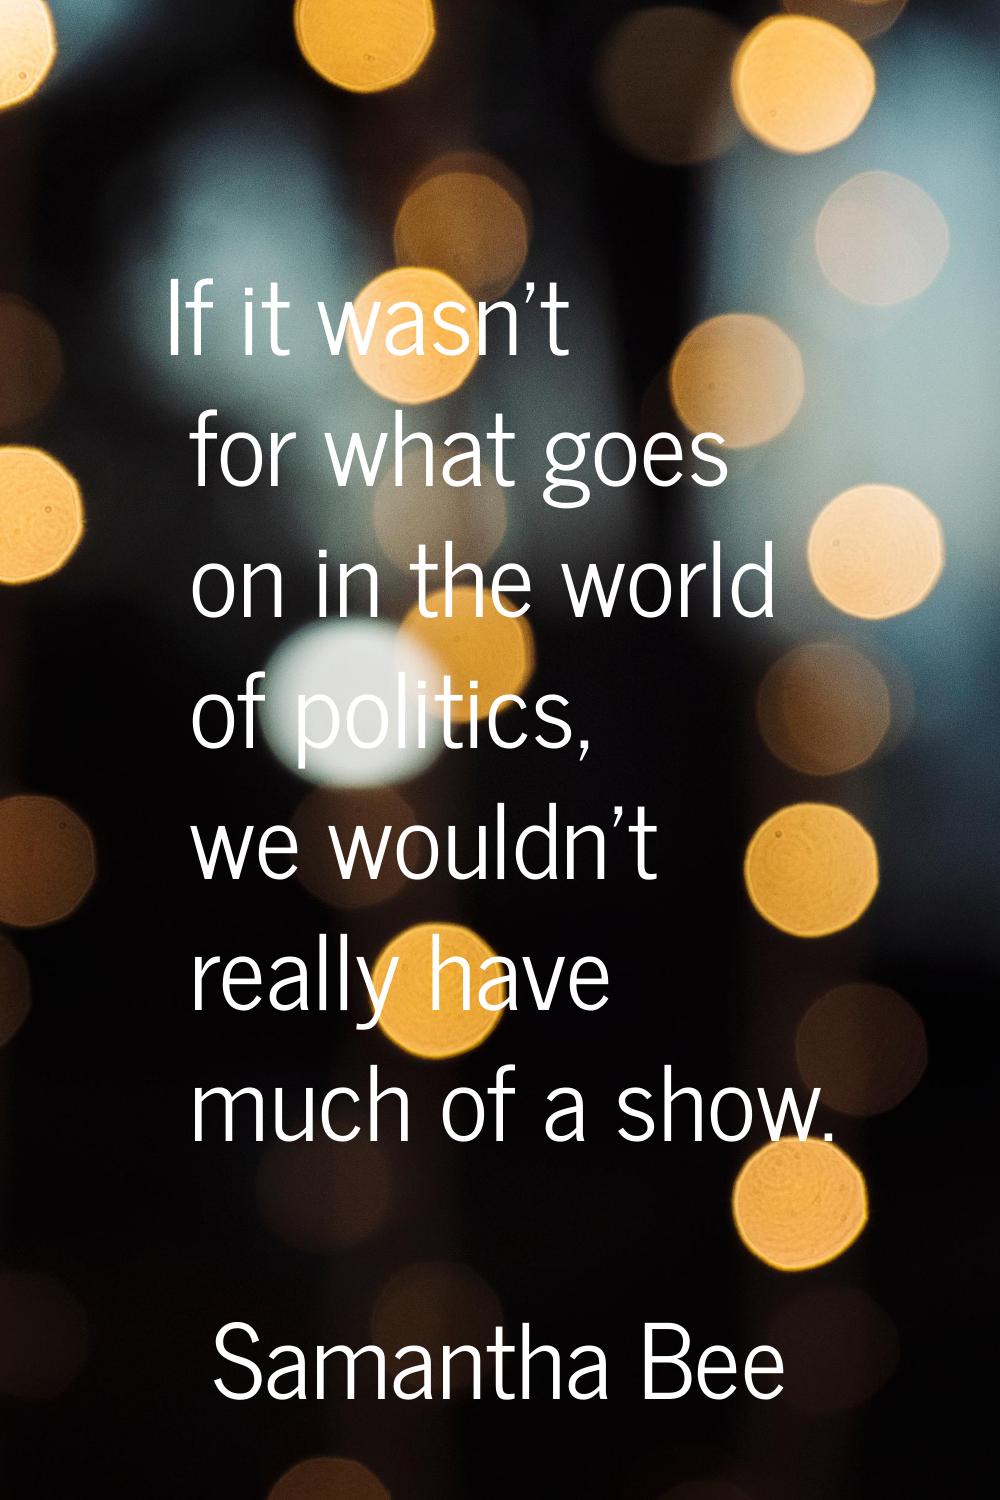 If it wasn't for what goes on in the world of politics, we wouldn't really have much of a show.